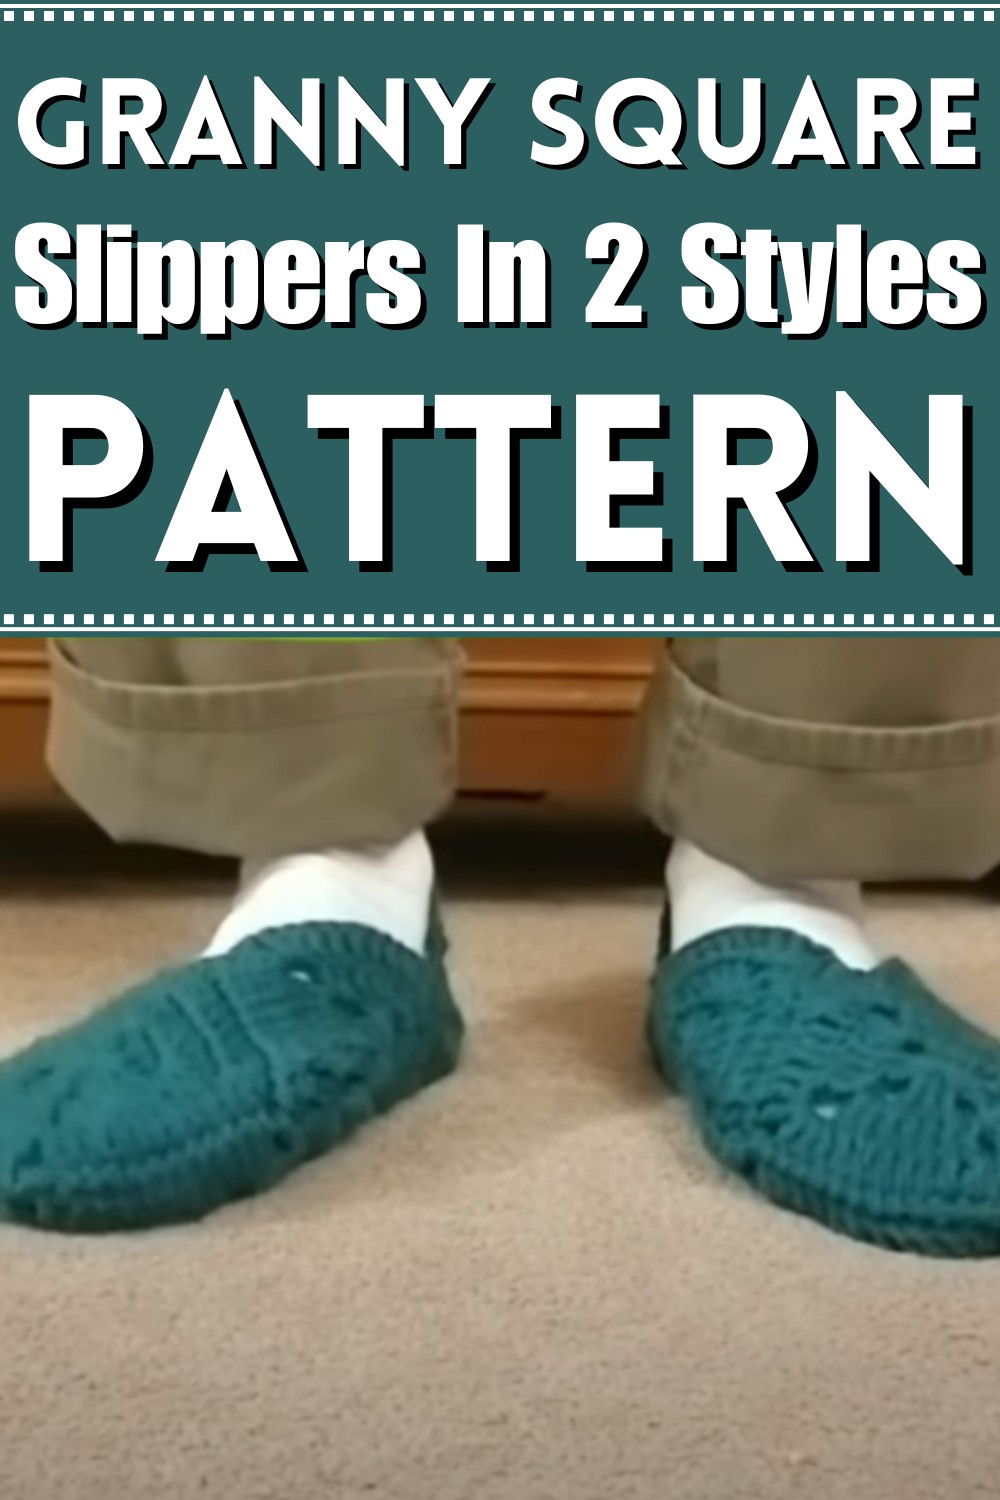 Granny Square Slippers In 2 Styles